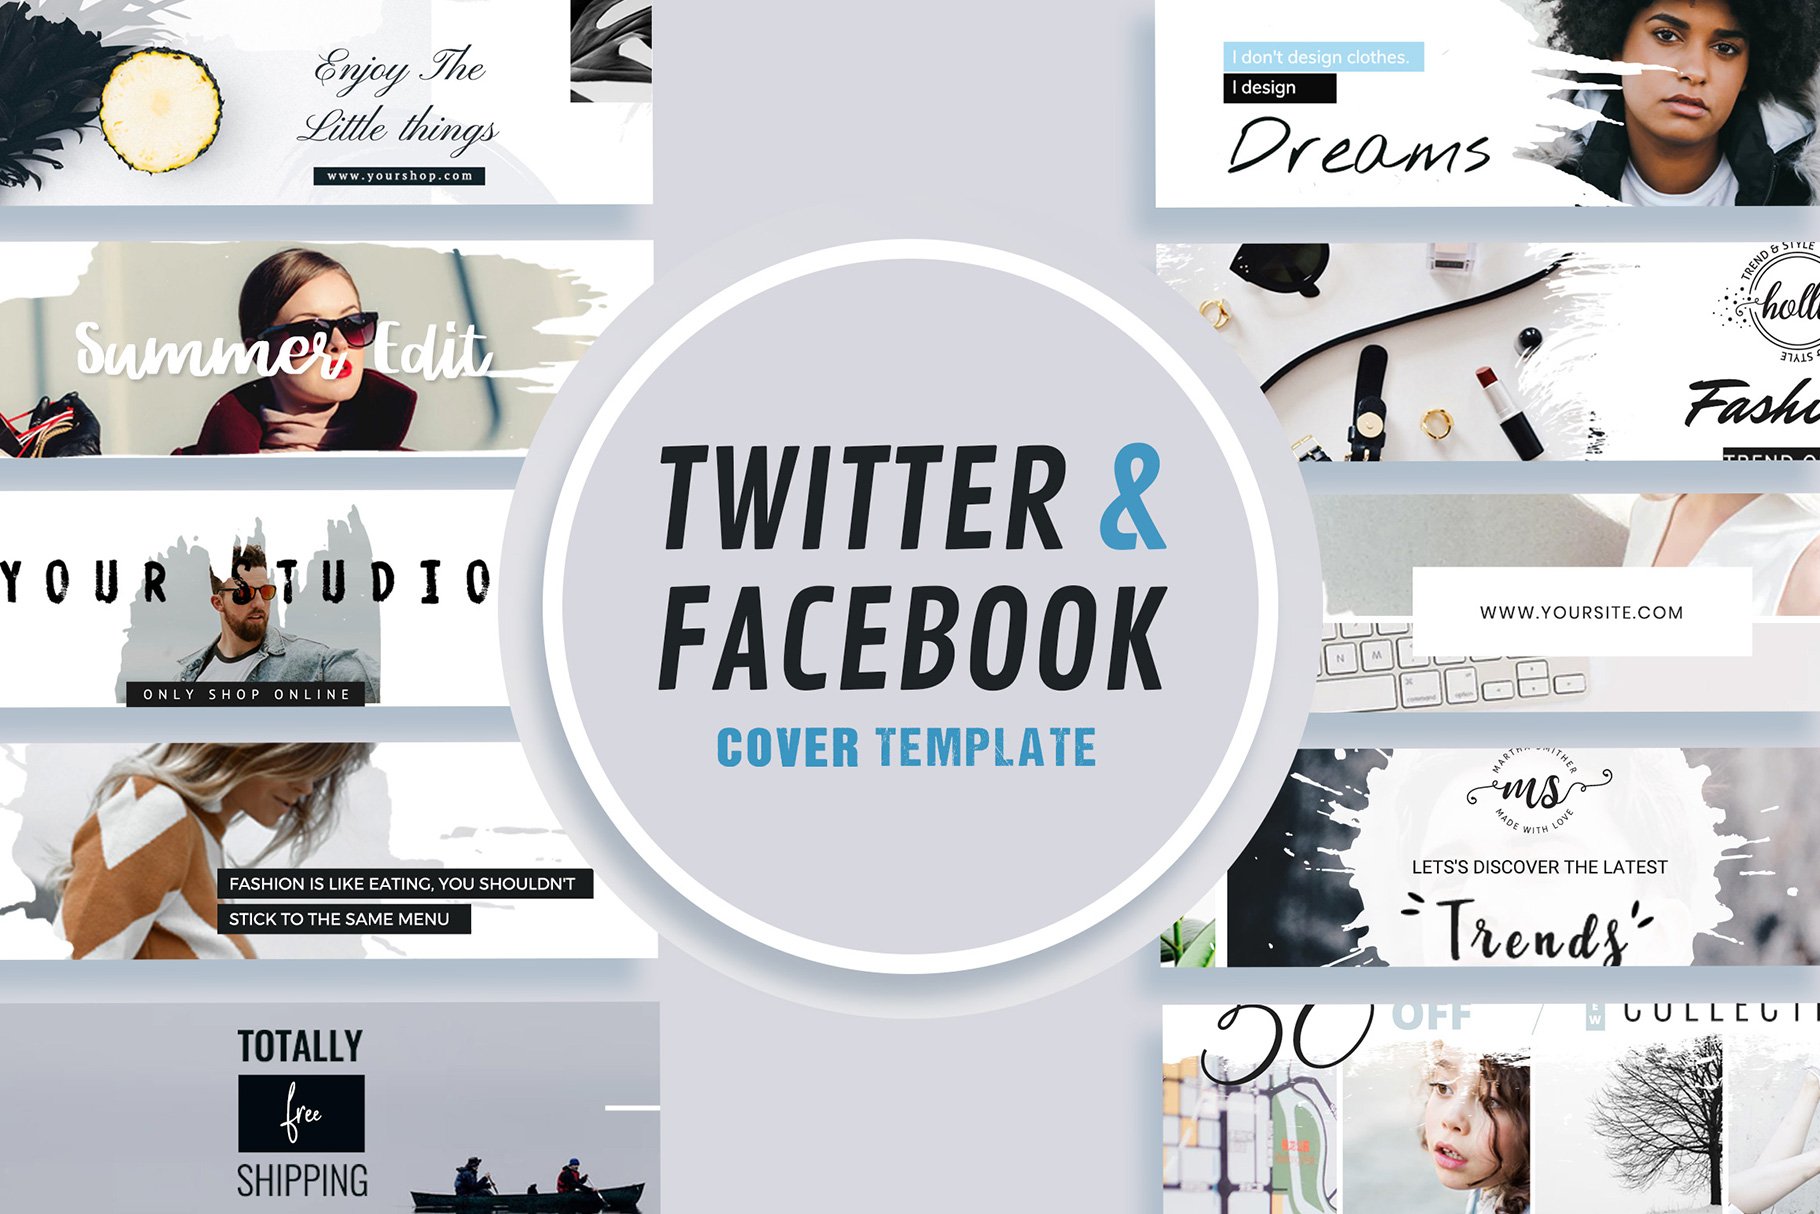 Facebook & Twitter Cover Templates cover image.